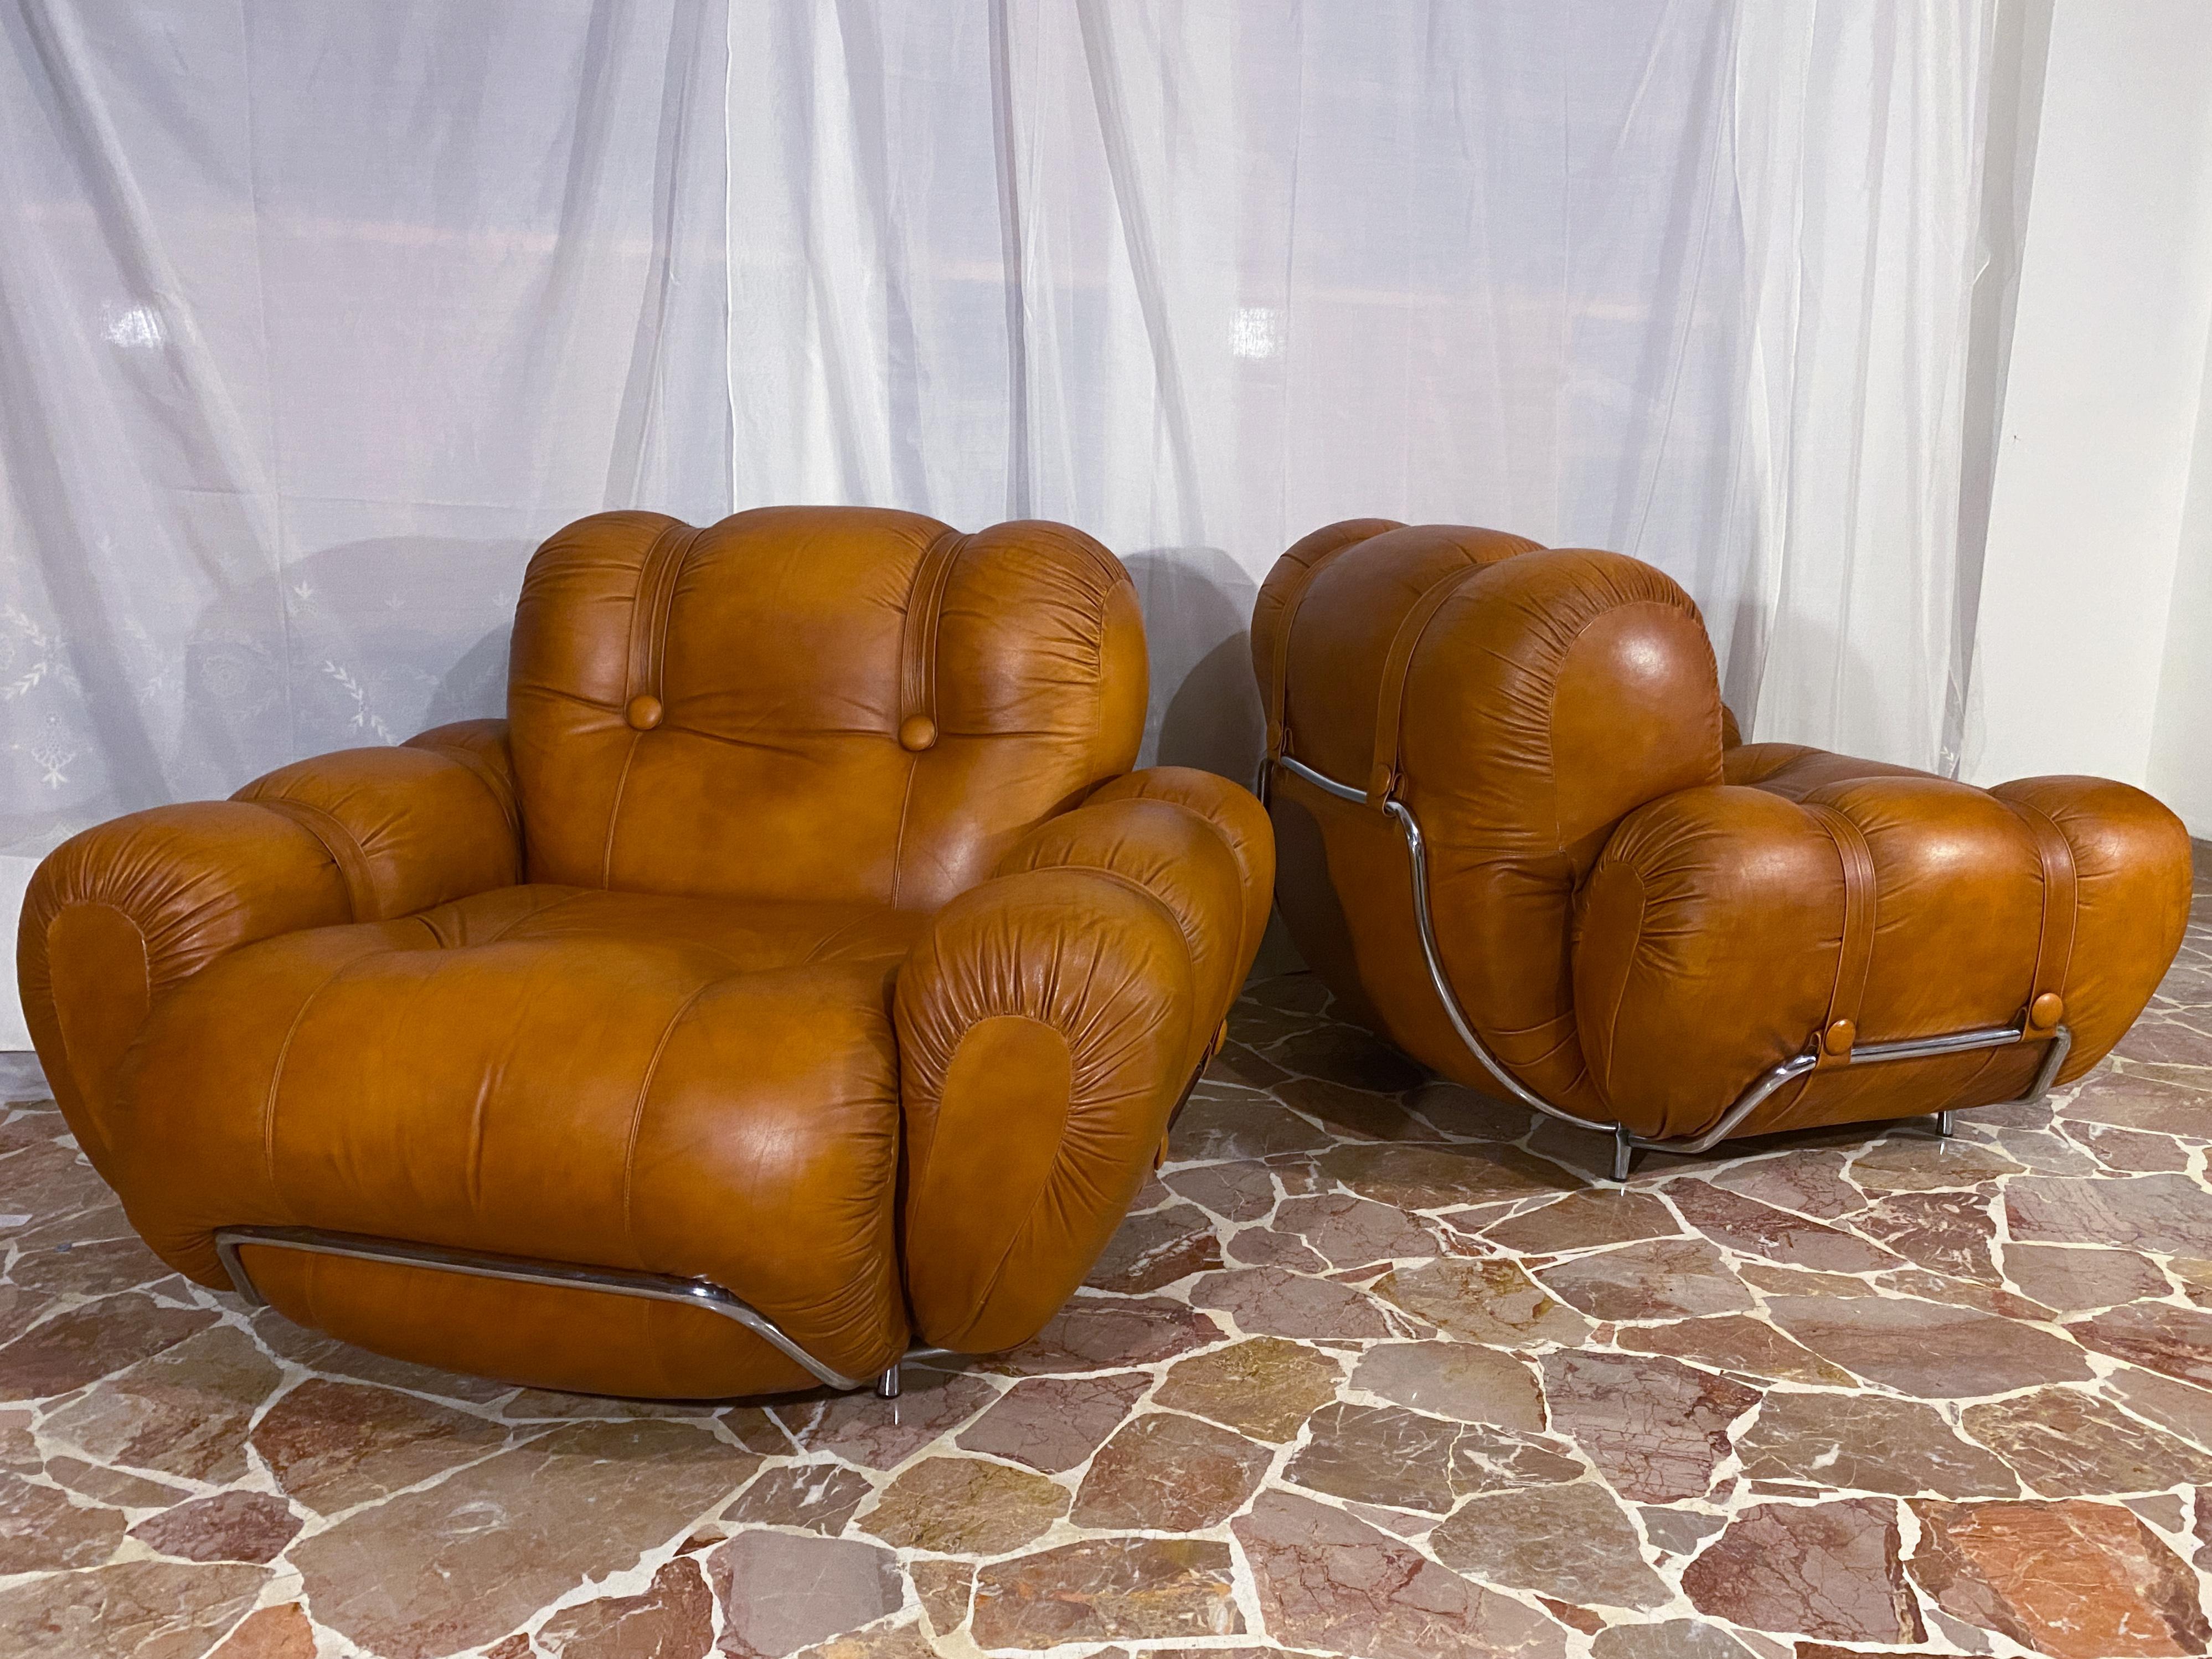 Italian Mid-Century Space Age Living Room Set in Natural Leather, 1970 For Sale 2